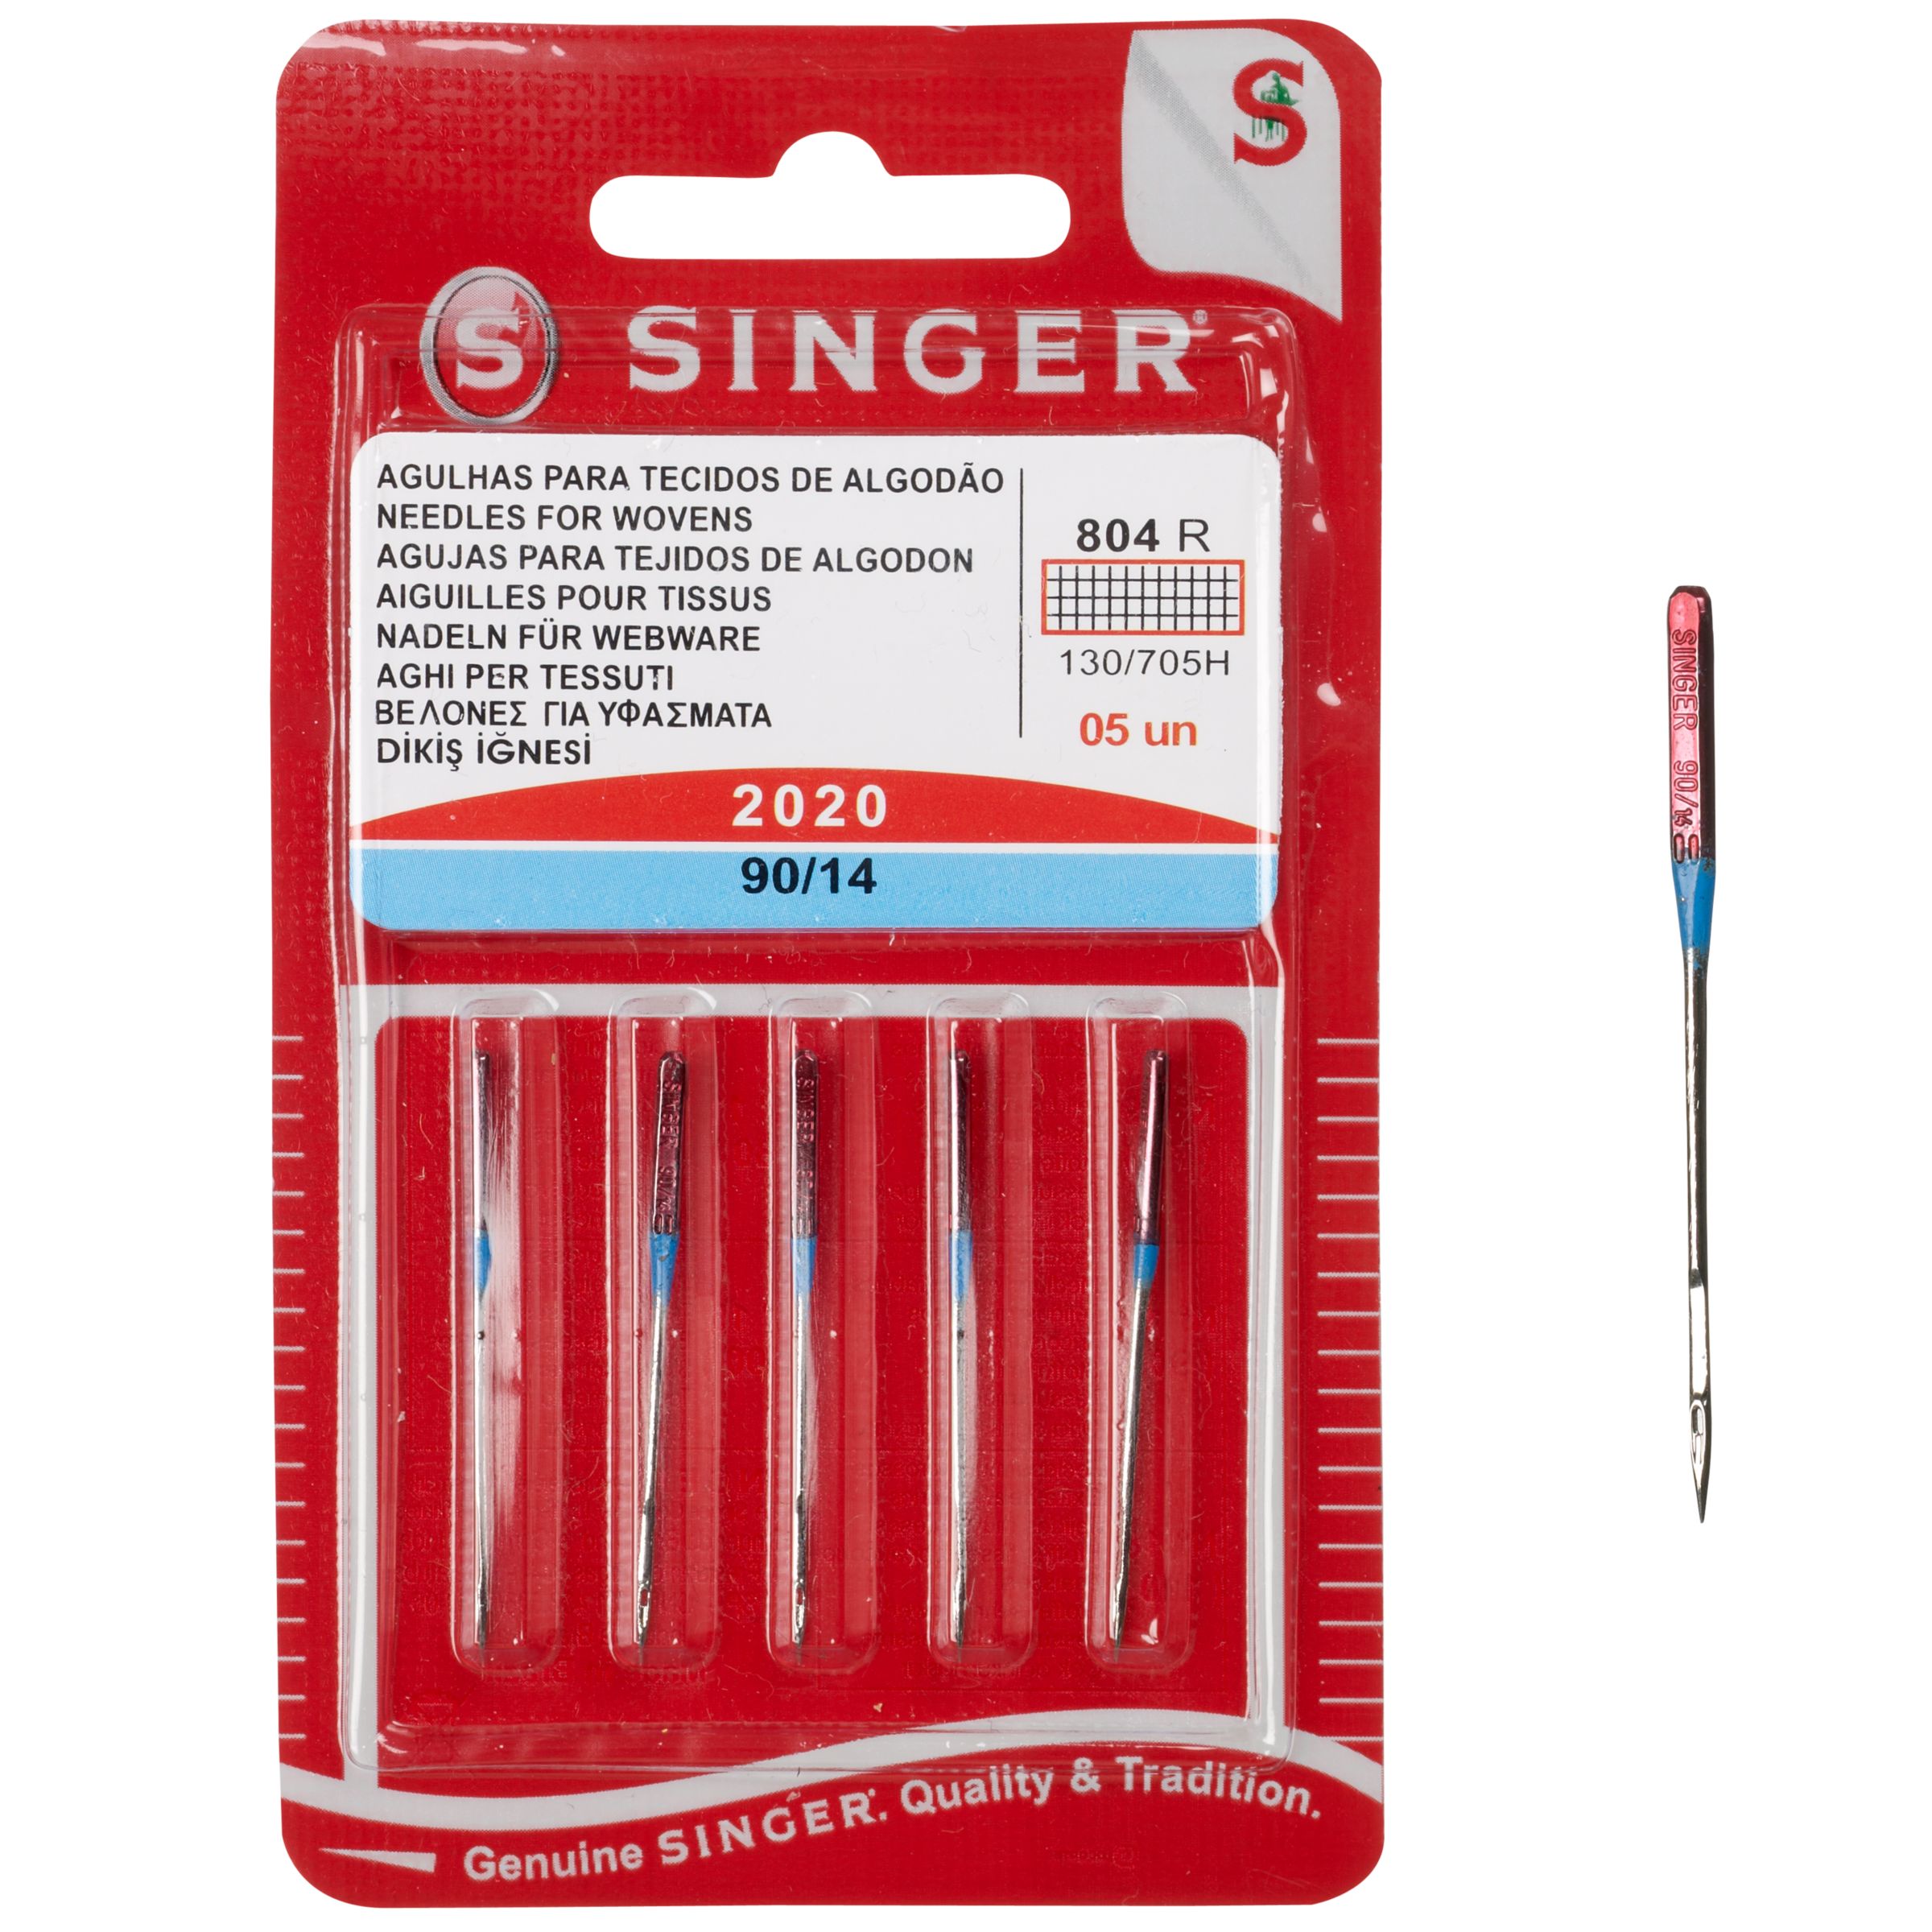 Singer Sewing Machine Needles Review